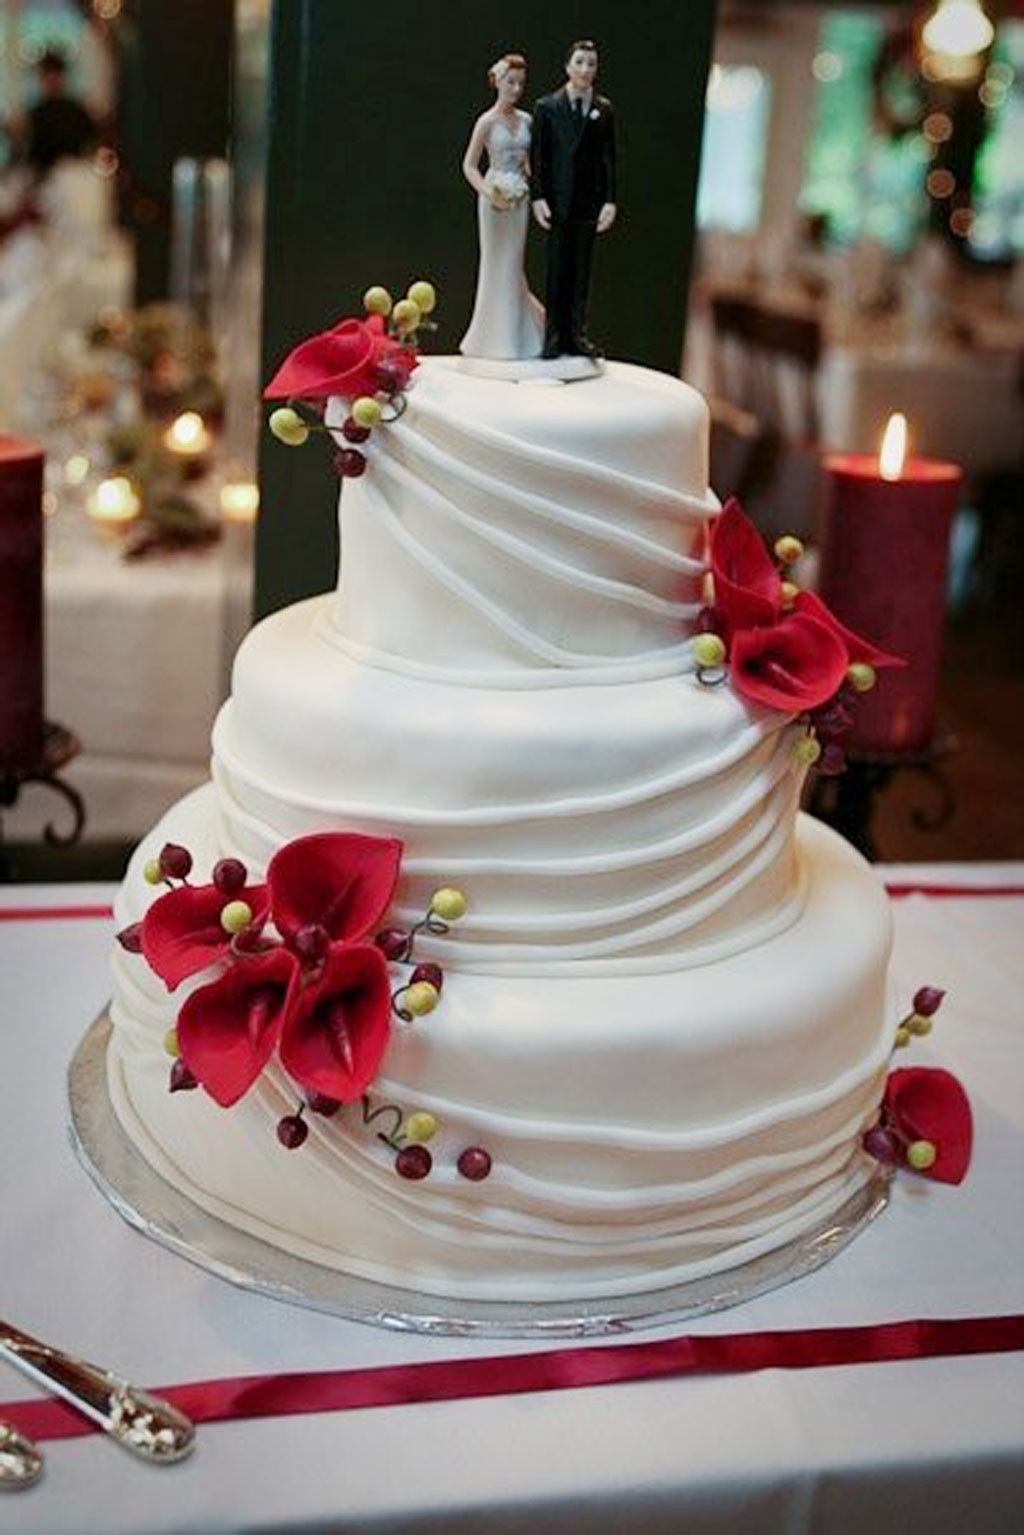 Wedding Cakes With Lilies
 Red Calla Lily Wedding Cake Design 2 Wedding Cake Cake